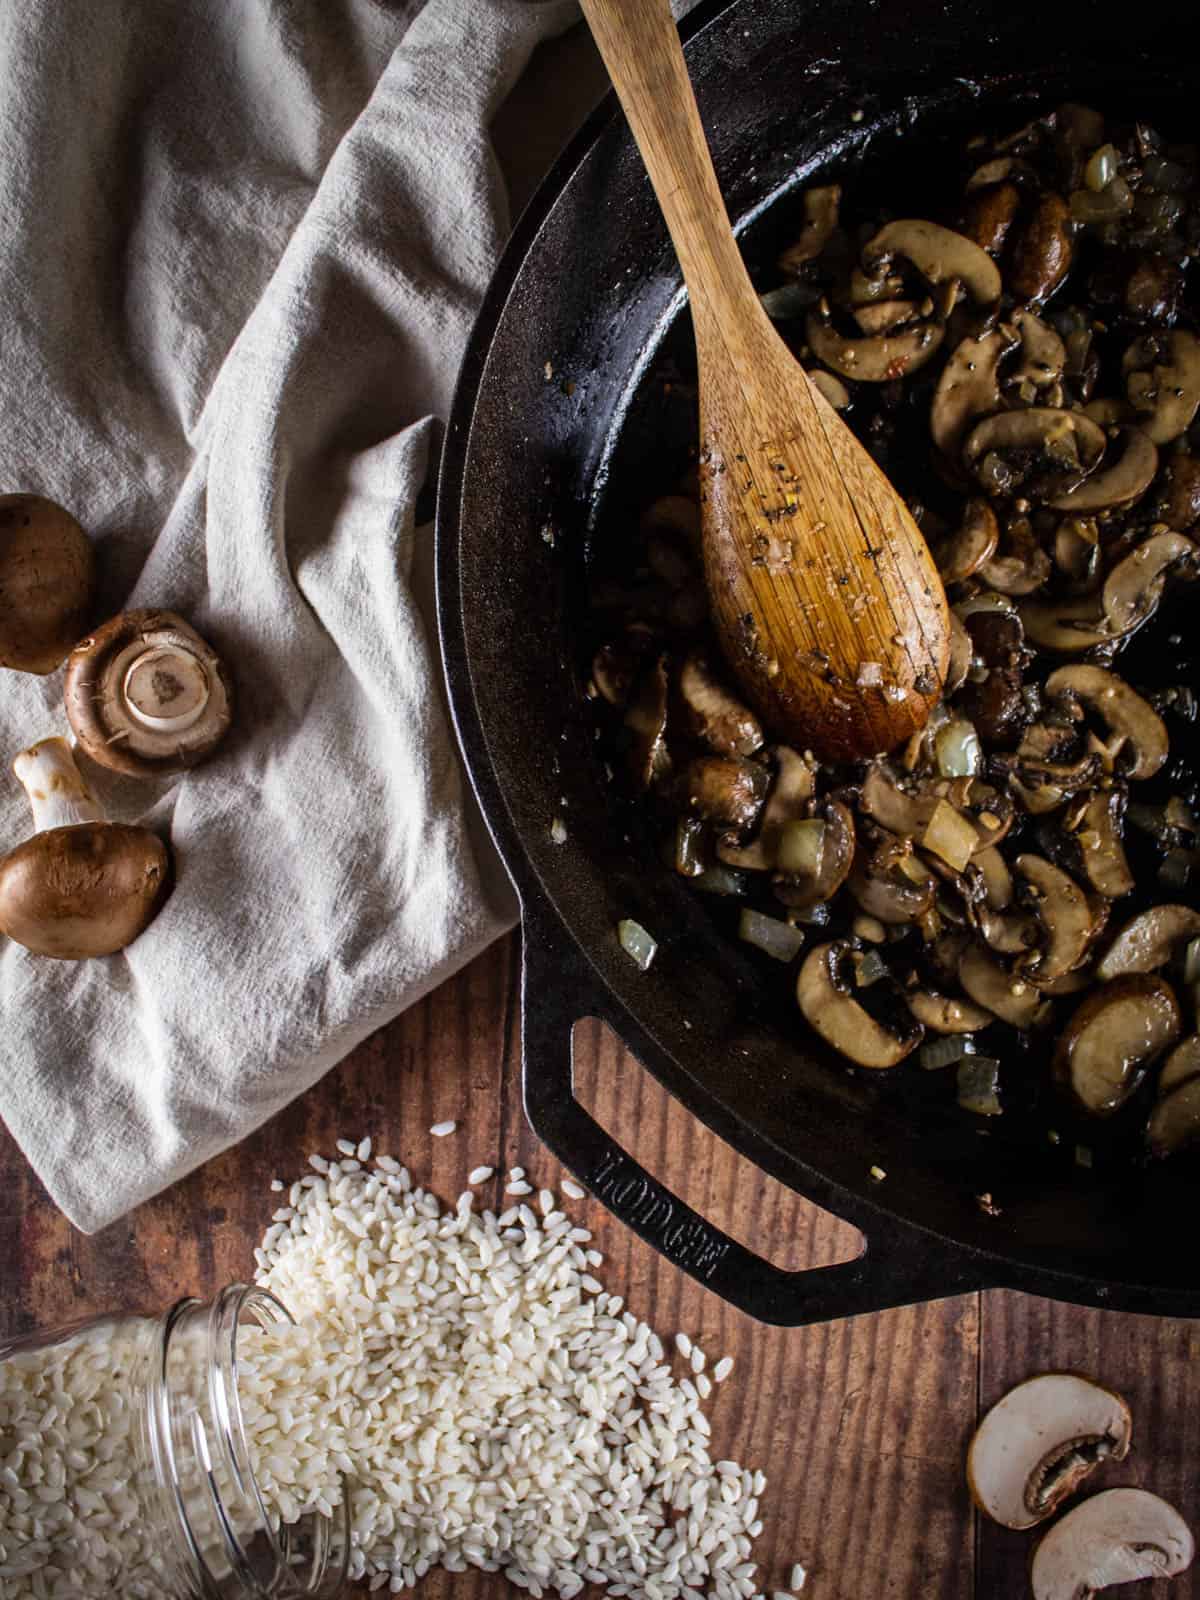 sauteed mushrooms, onions and garlic in a cast iron skillet